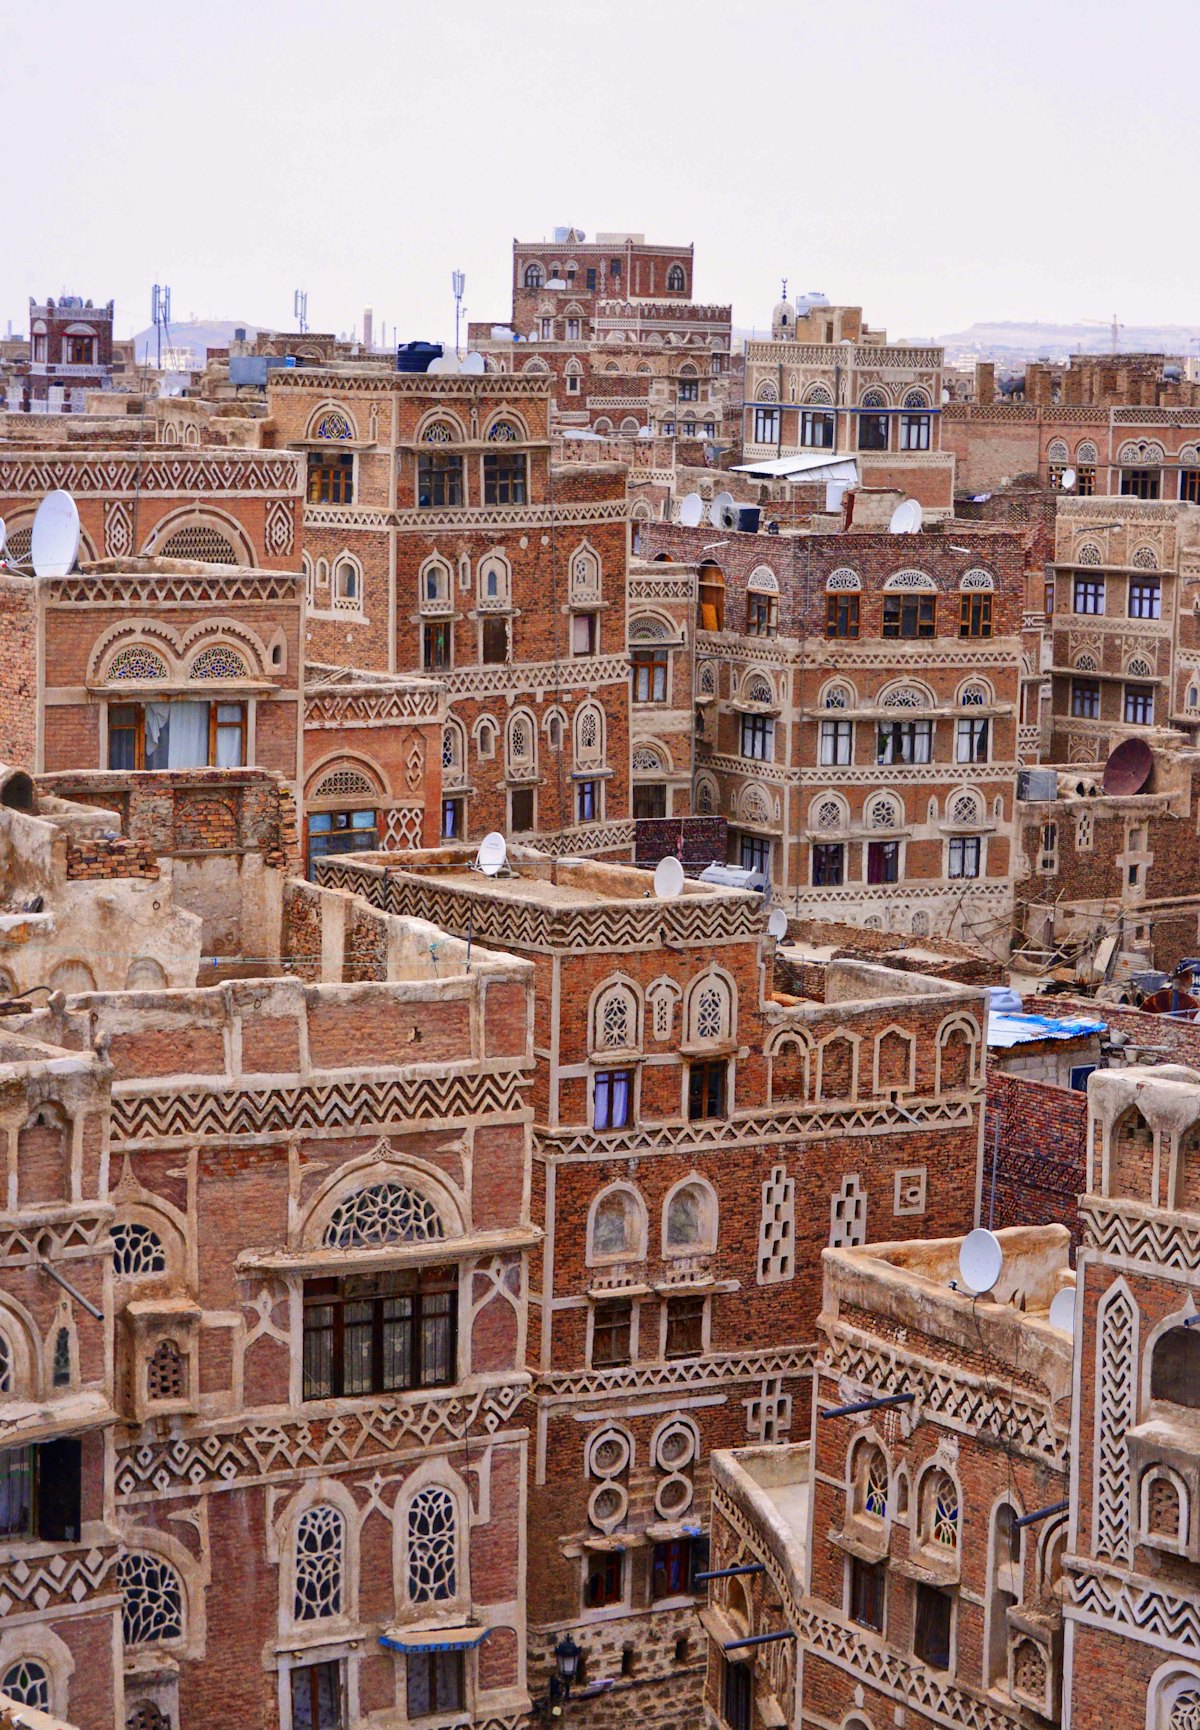 Image of the Old City of Sana’a. Sana’a is the largest city in Yemen. Photo credit: Rod Waddington